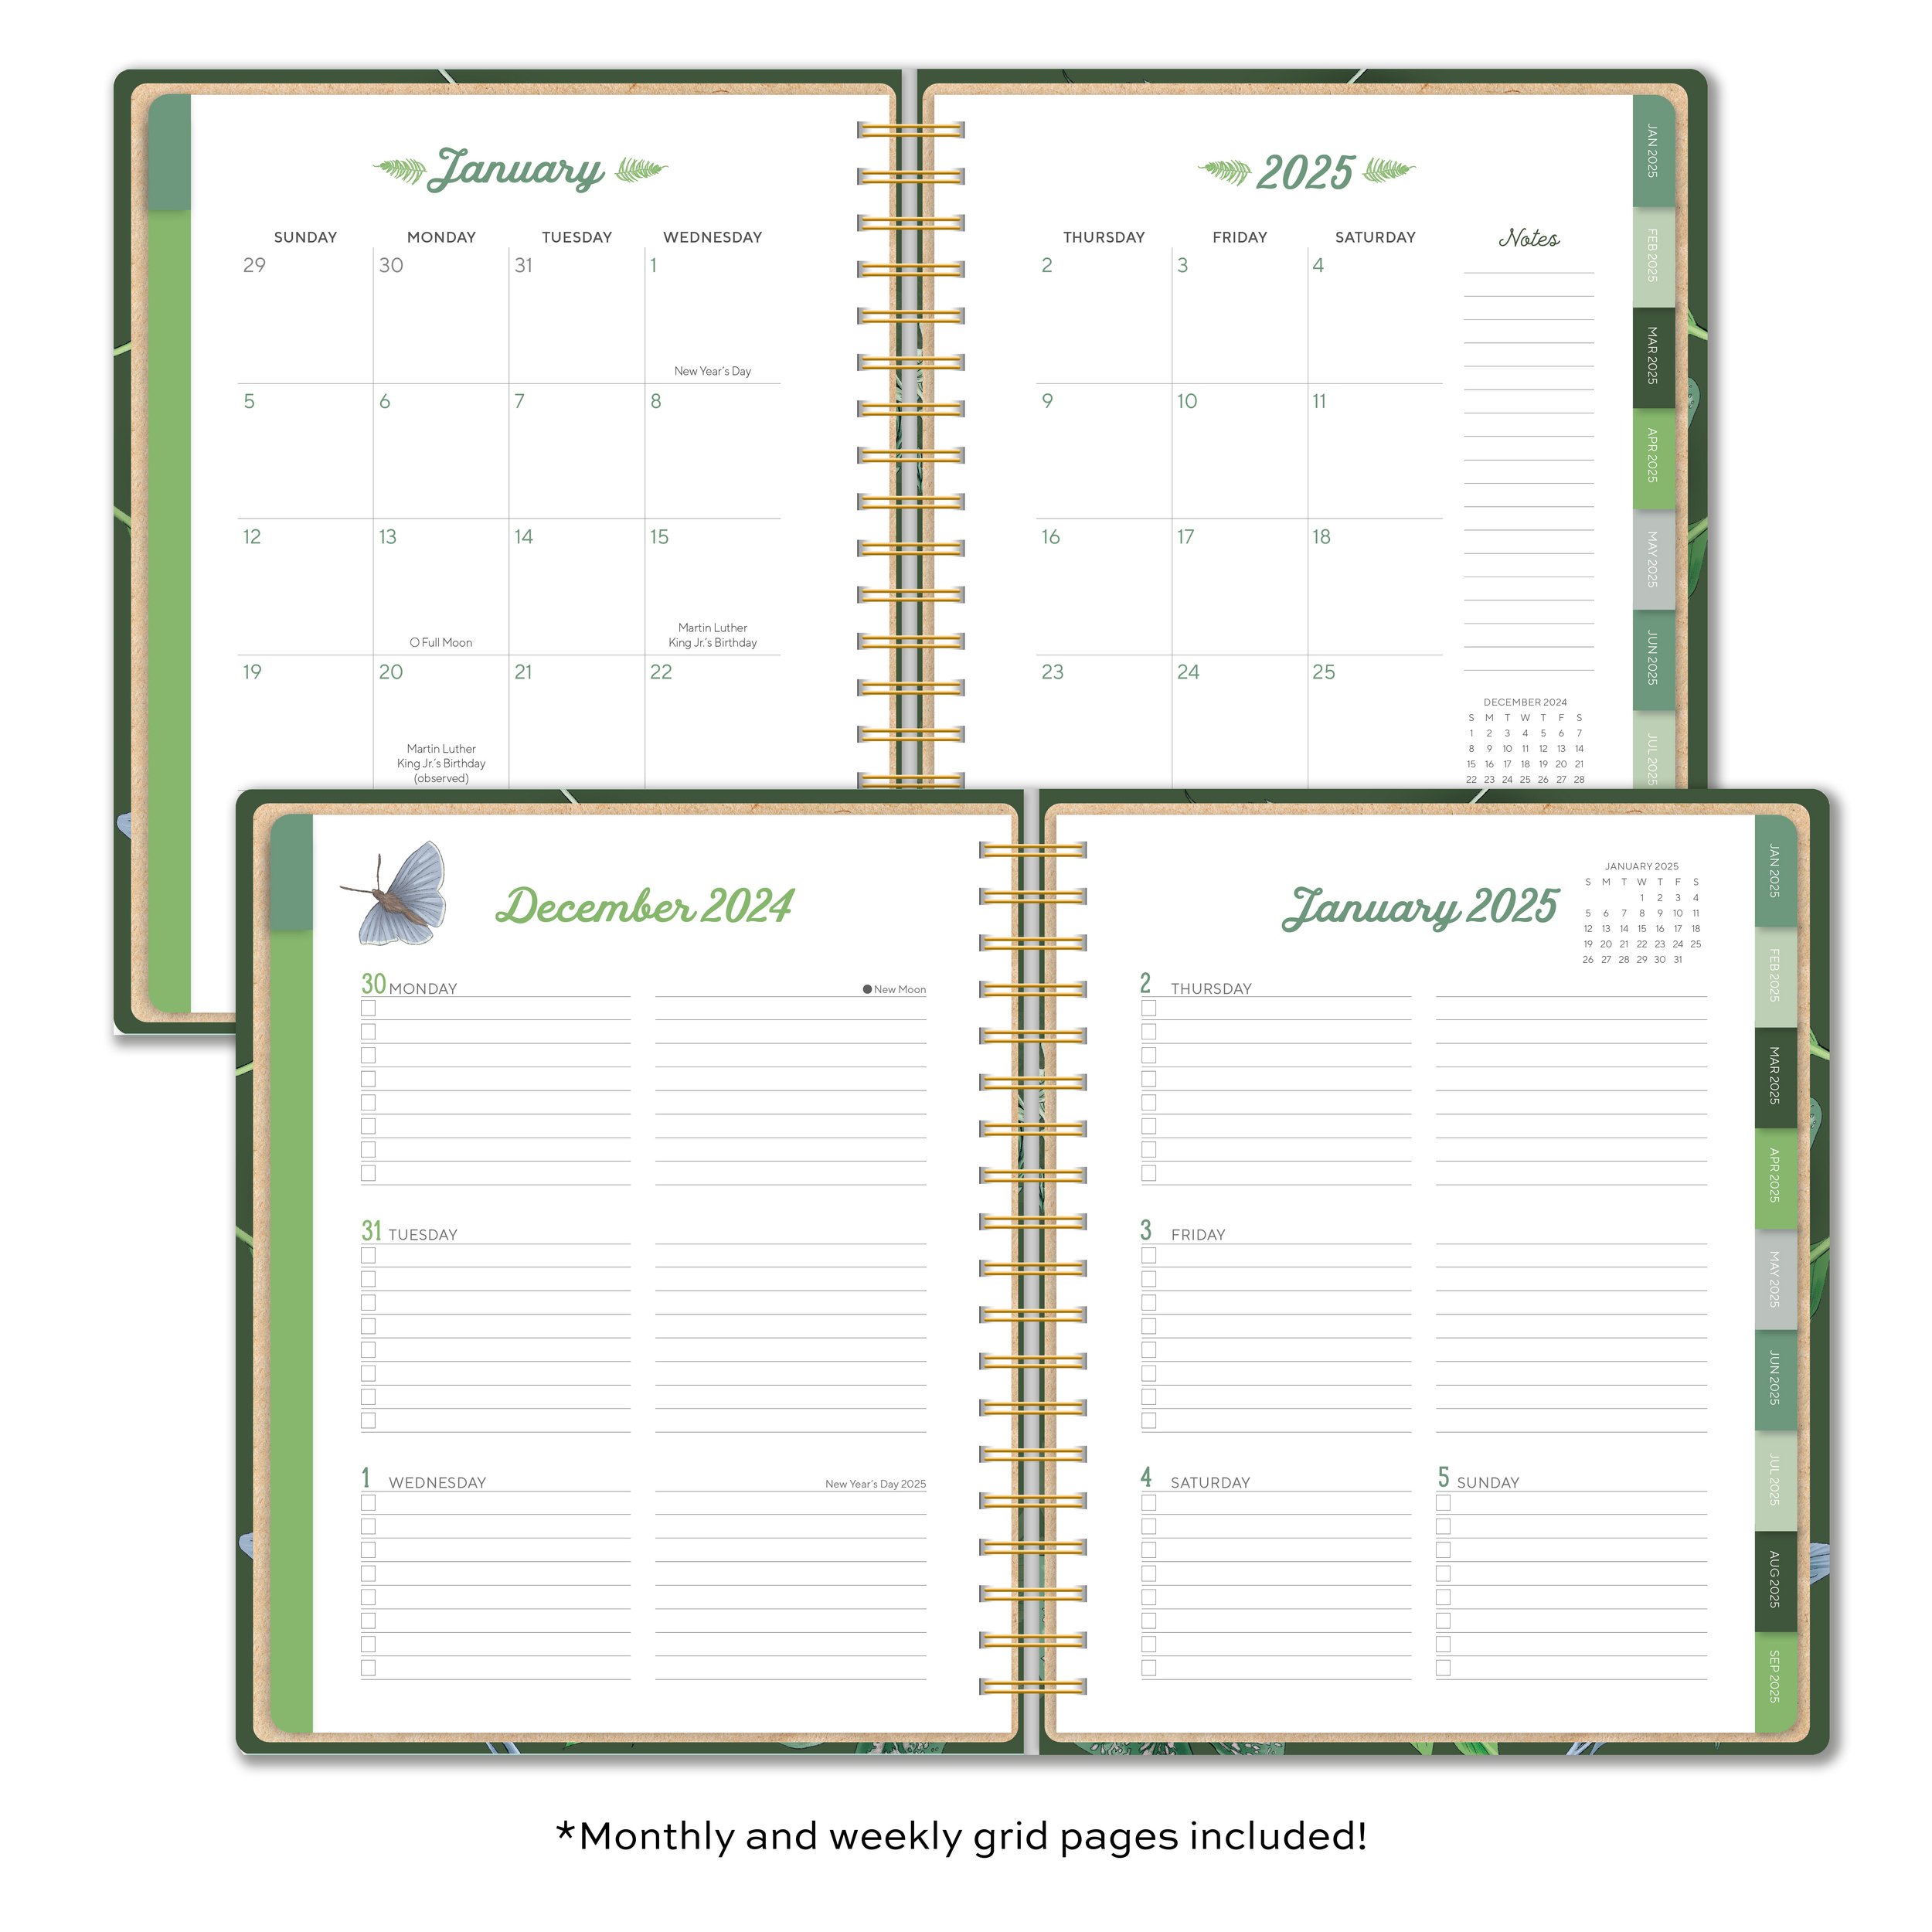 CHL-4205 Greenery Deluxe Planner Interior Pages.jpg